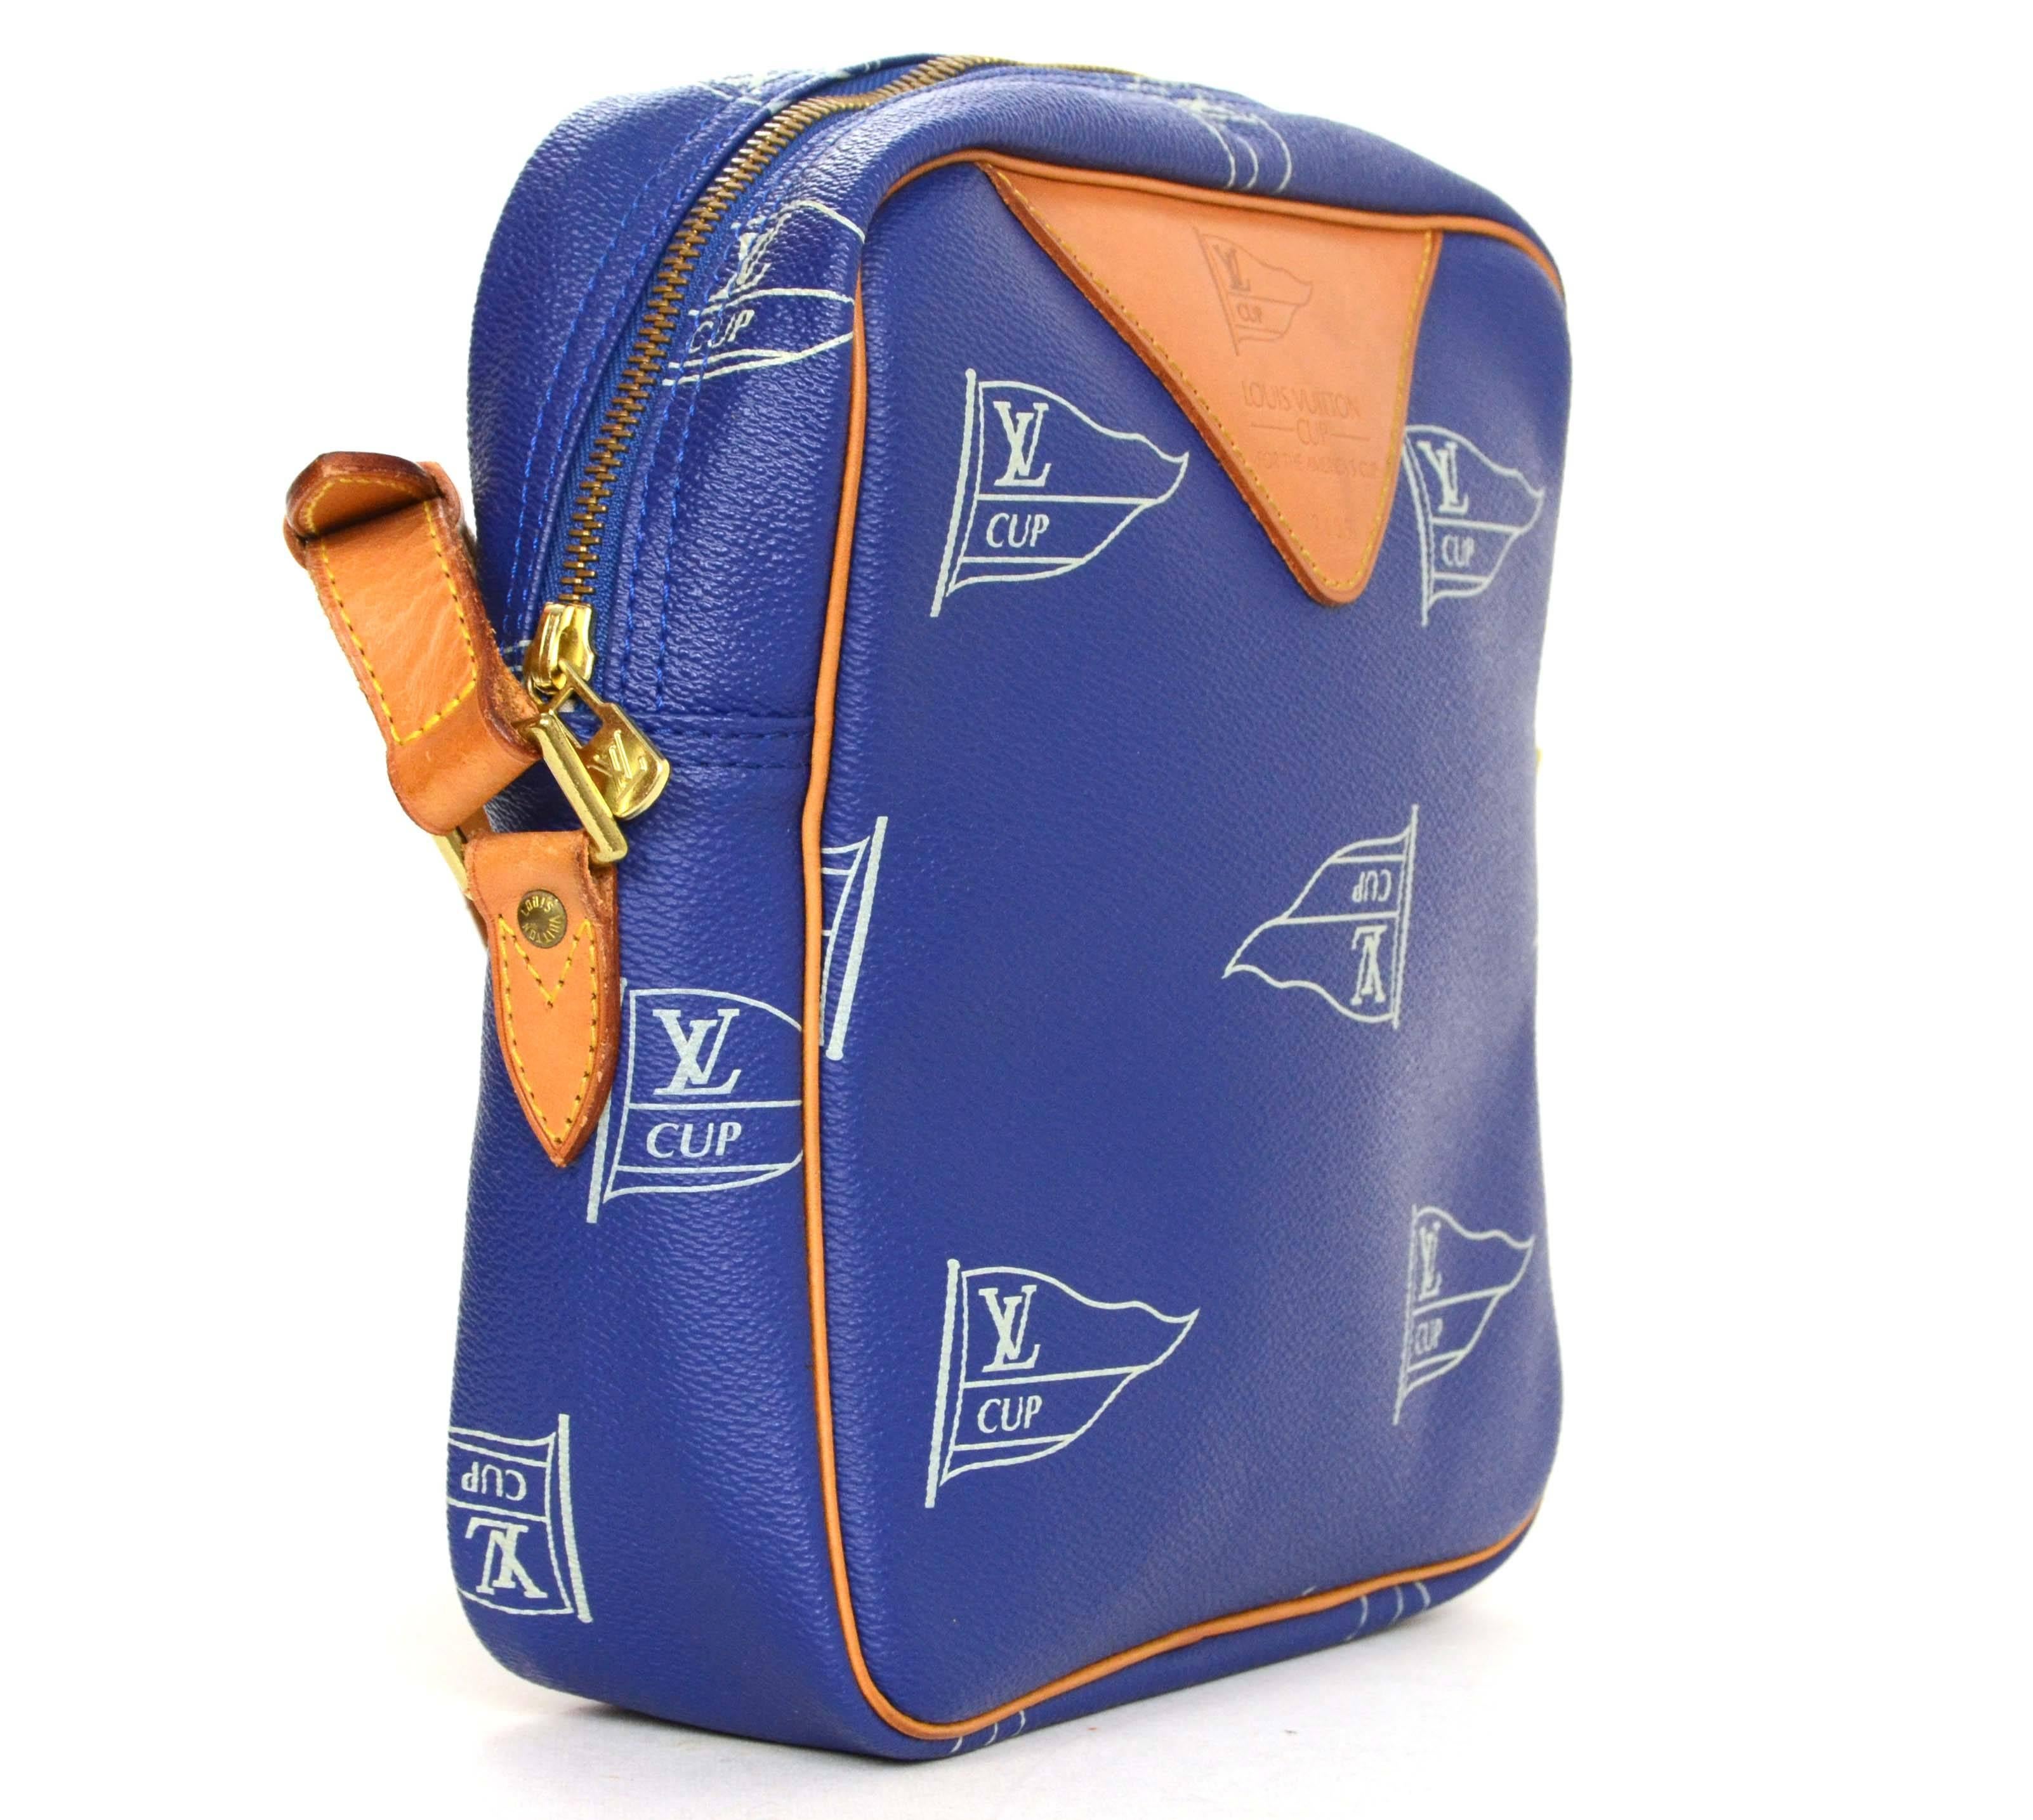 Louis Vuitton Ltd Ed Vintage ’92 Blue “LV Cup” Crossbody Bag
Features “Louis Vuitton Cup For The America’s Cup 2405” stamped on front of bag
Made In: France
Year of Production: 1992
Color: Blue, white, tan and goldtone
Hardware: